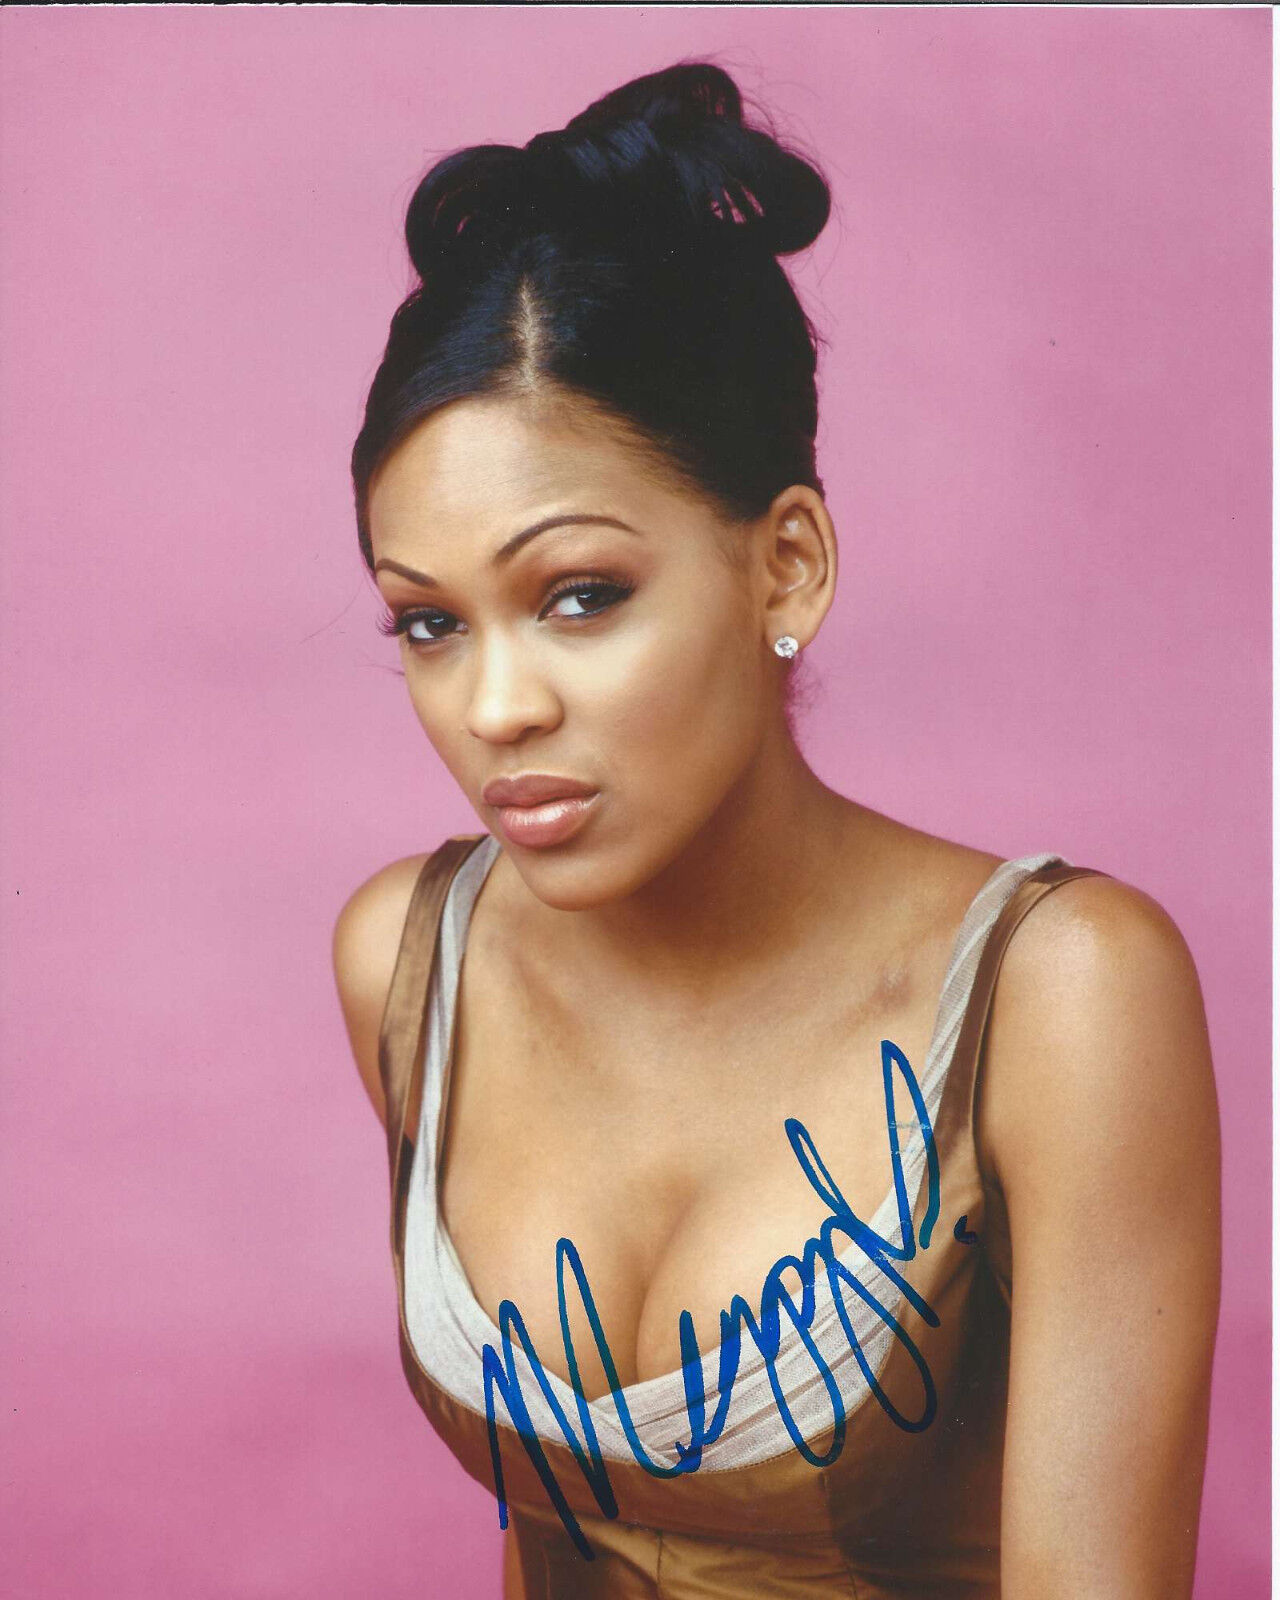 SEXY ACTRESS MEAGAN GOOD HAND SIGNED AUTHENTIC ANCHORMAN 2 8X10 Photo Poster painting D w/COA